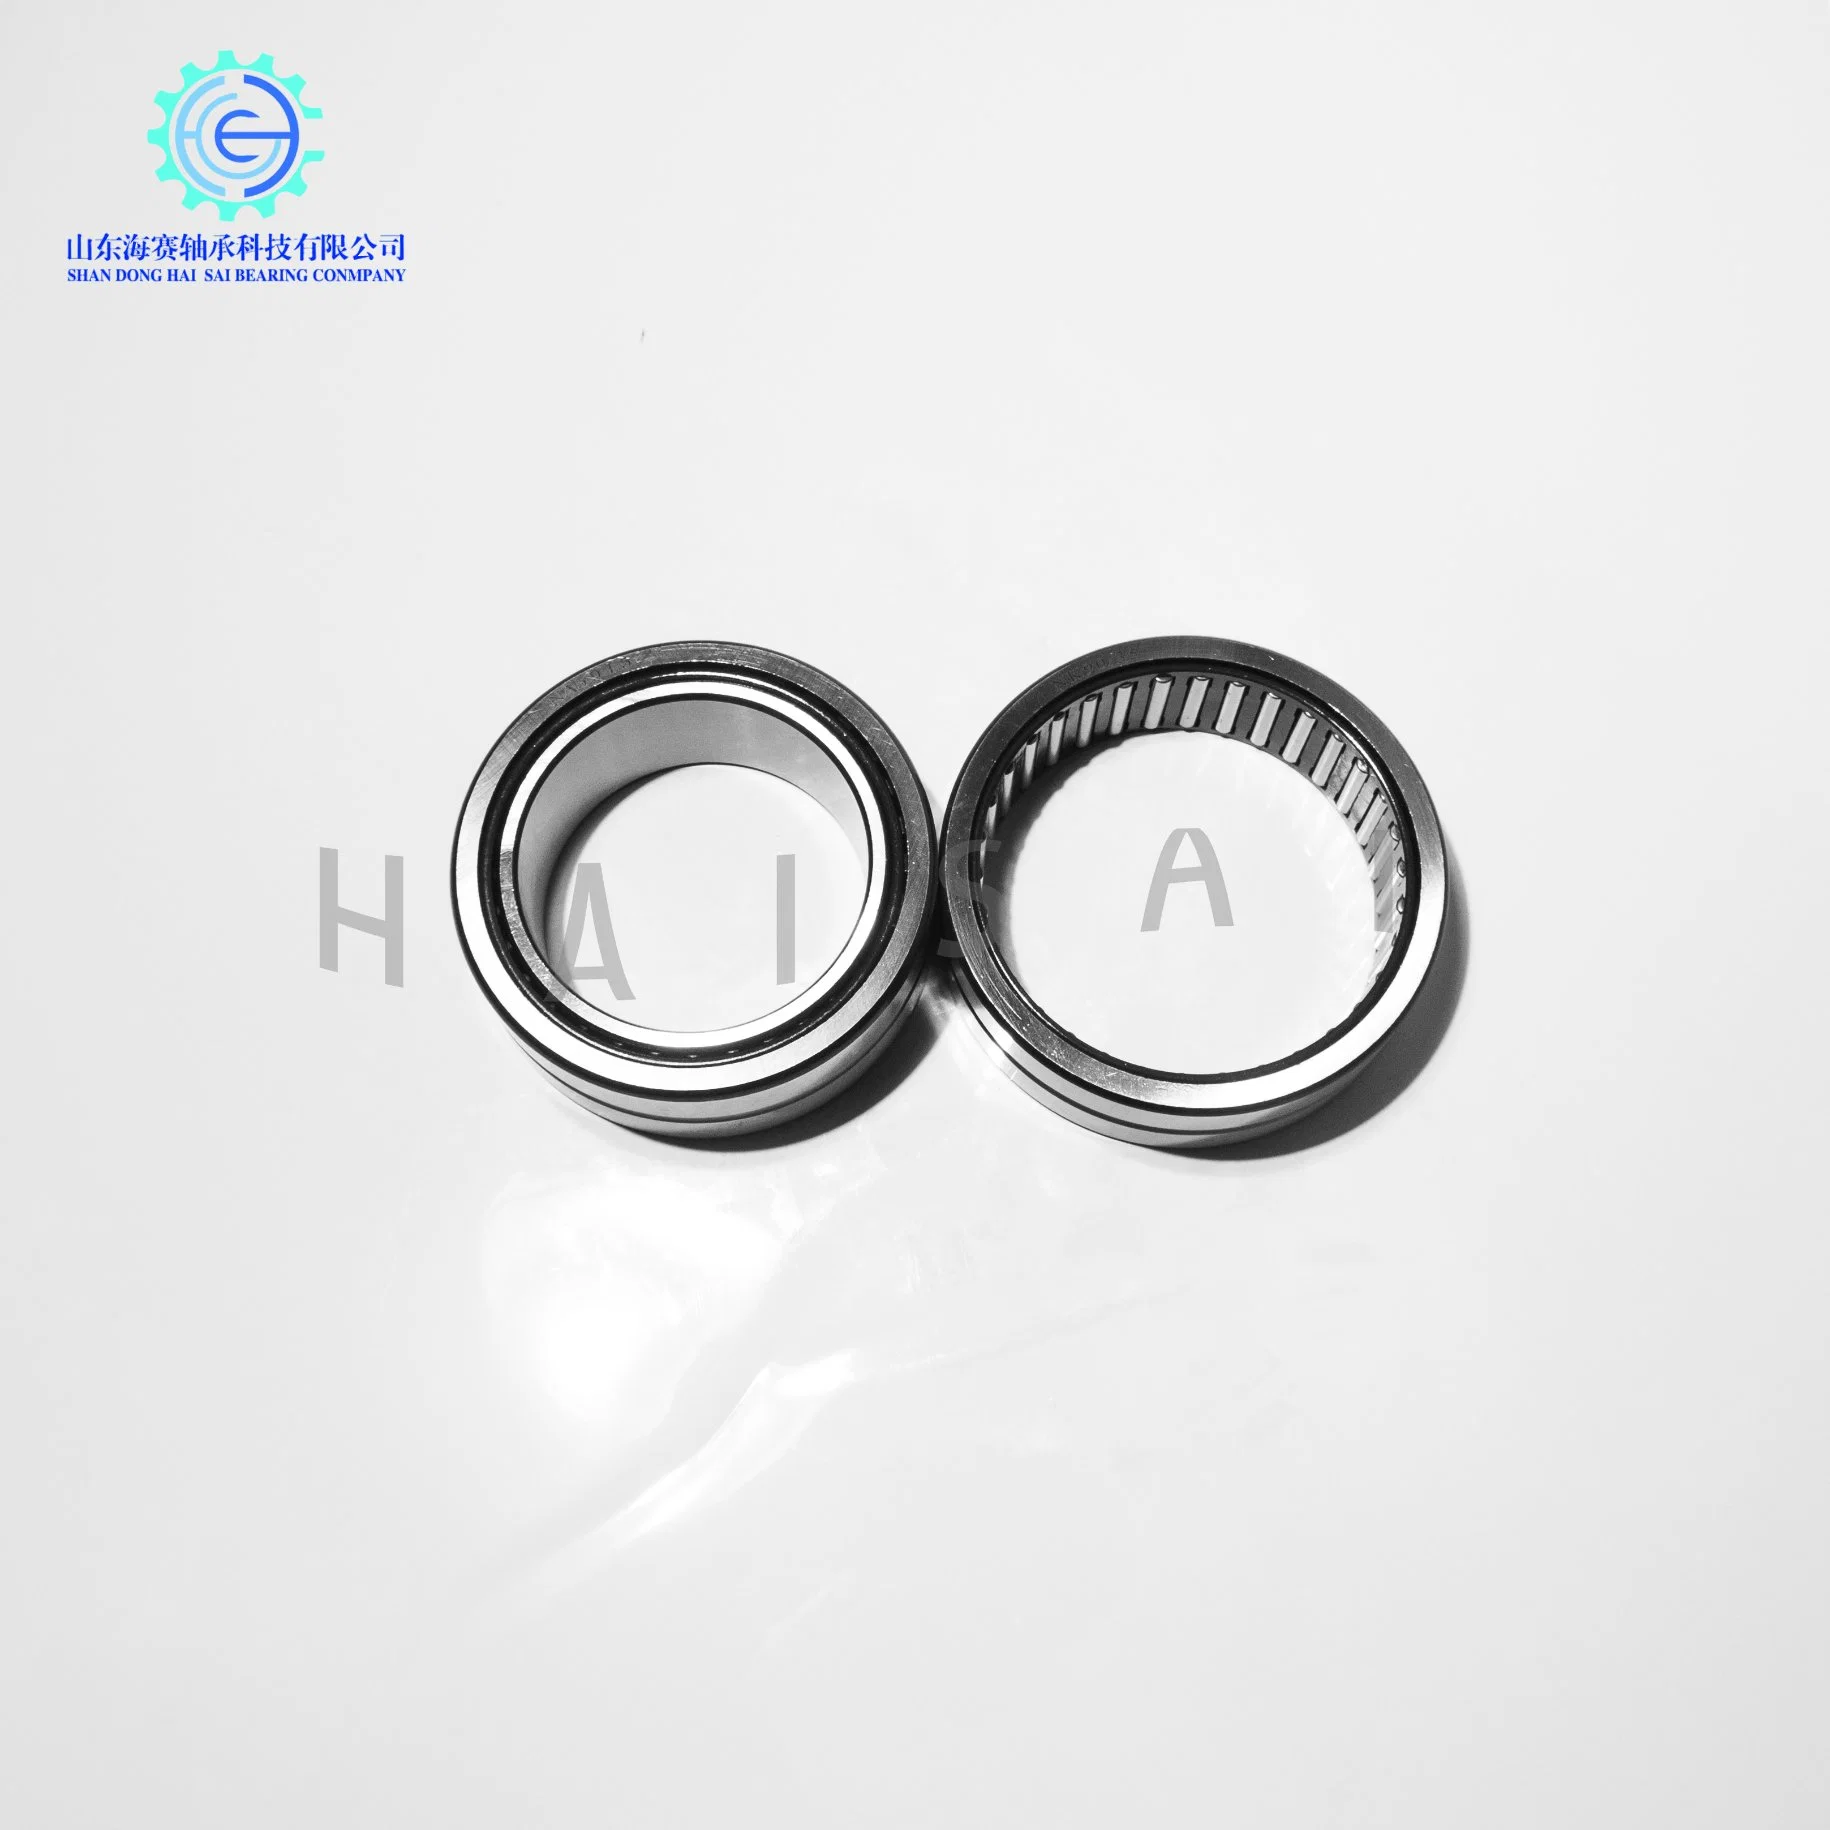 1688 Transmission Parts Na5915 Nk90 Needle Bearing with High Quality